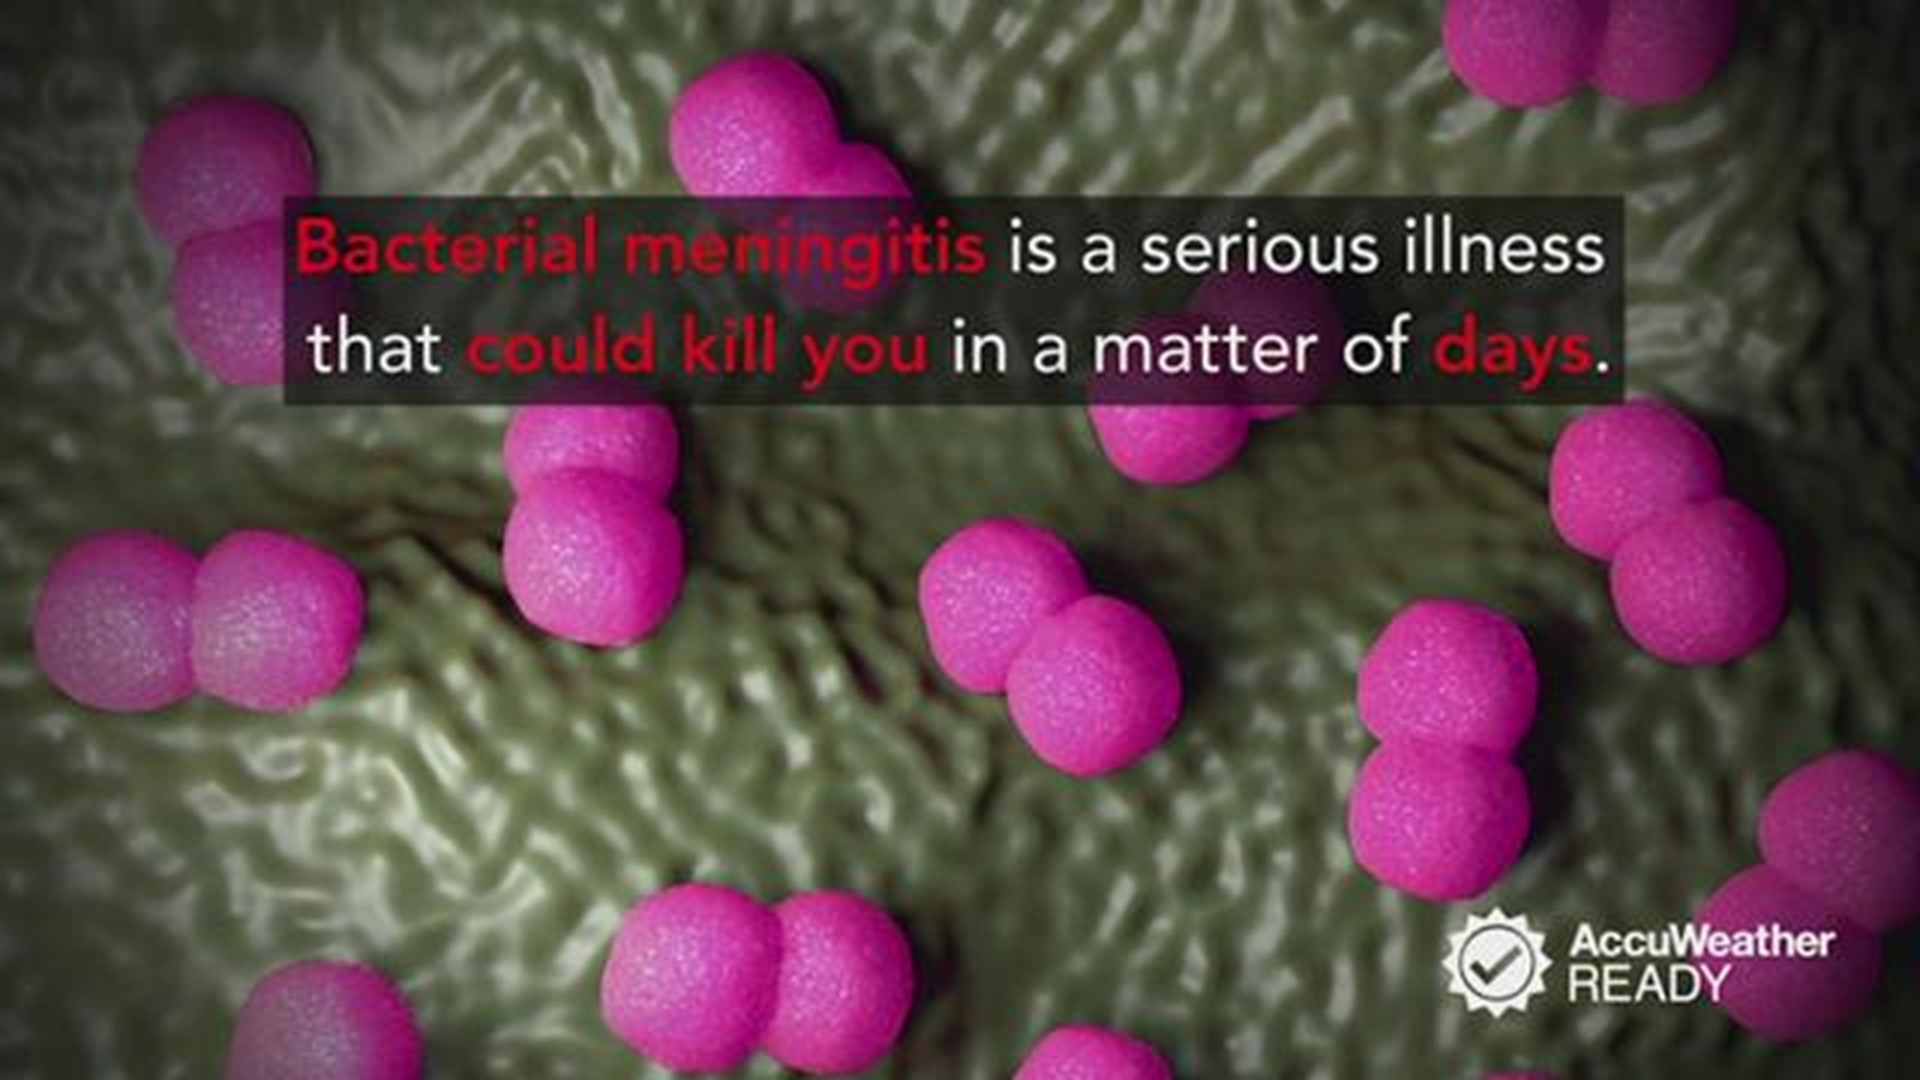 The flu and common cold aren't the only wintertime health threats you have to worry about. Research shows that cases of the potentially fatal bacterial meningitis are more likely to happen during the colder months.